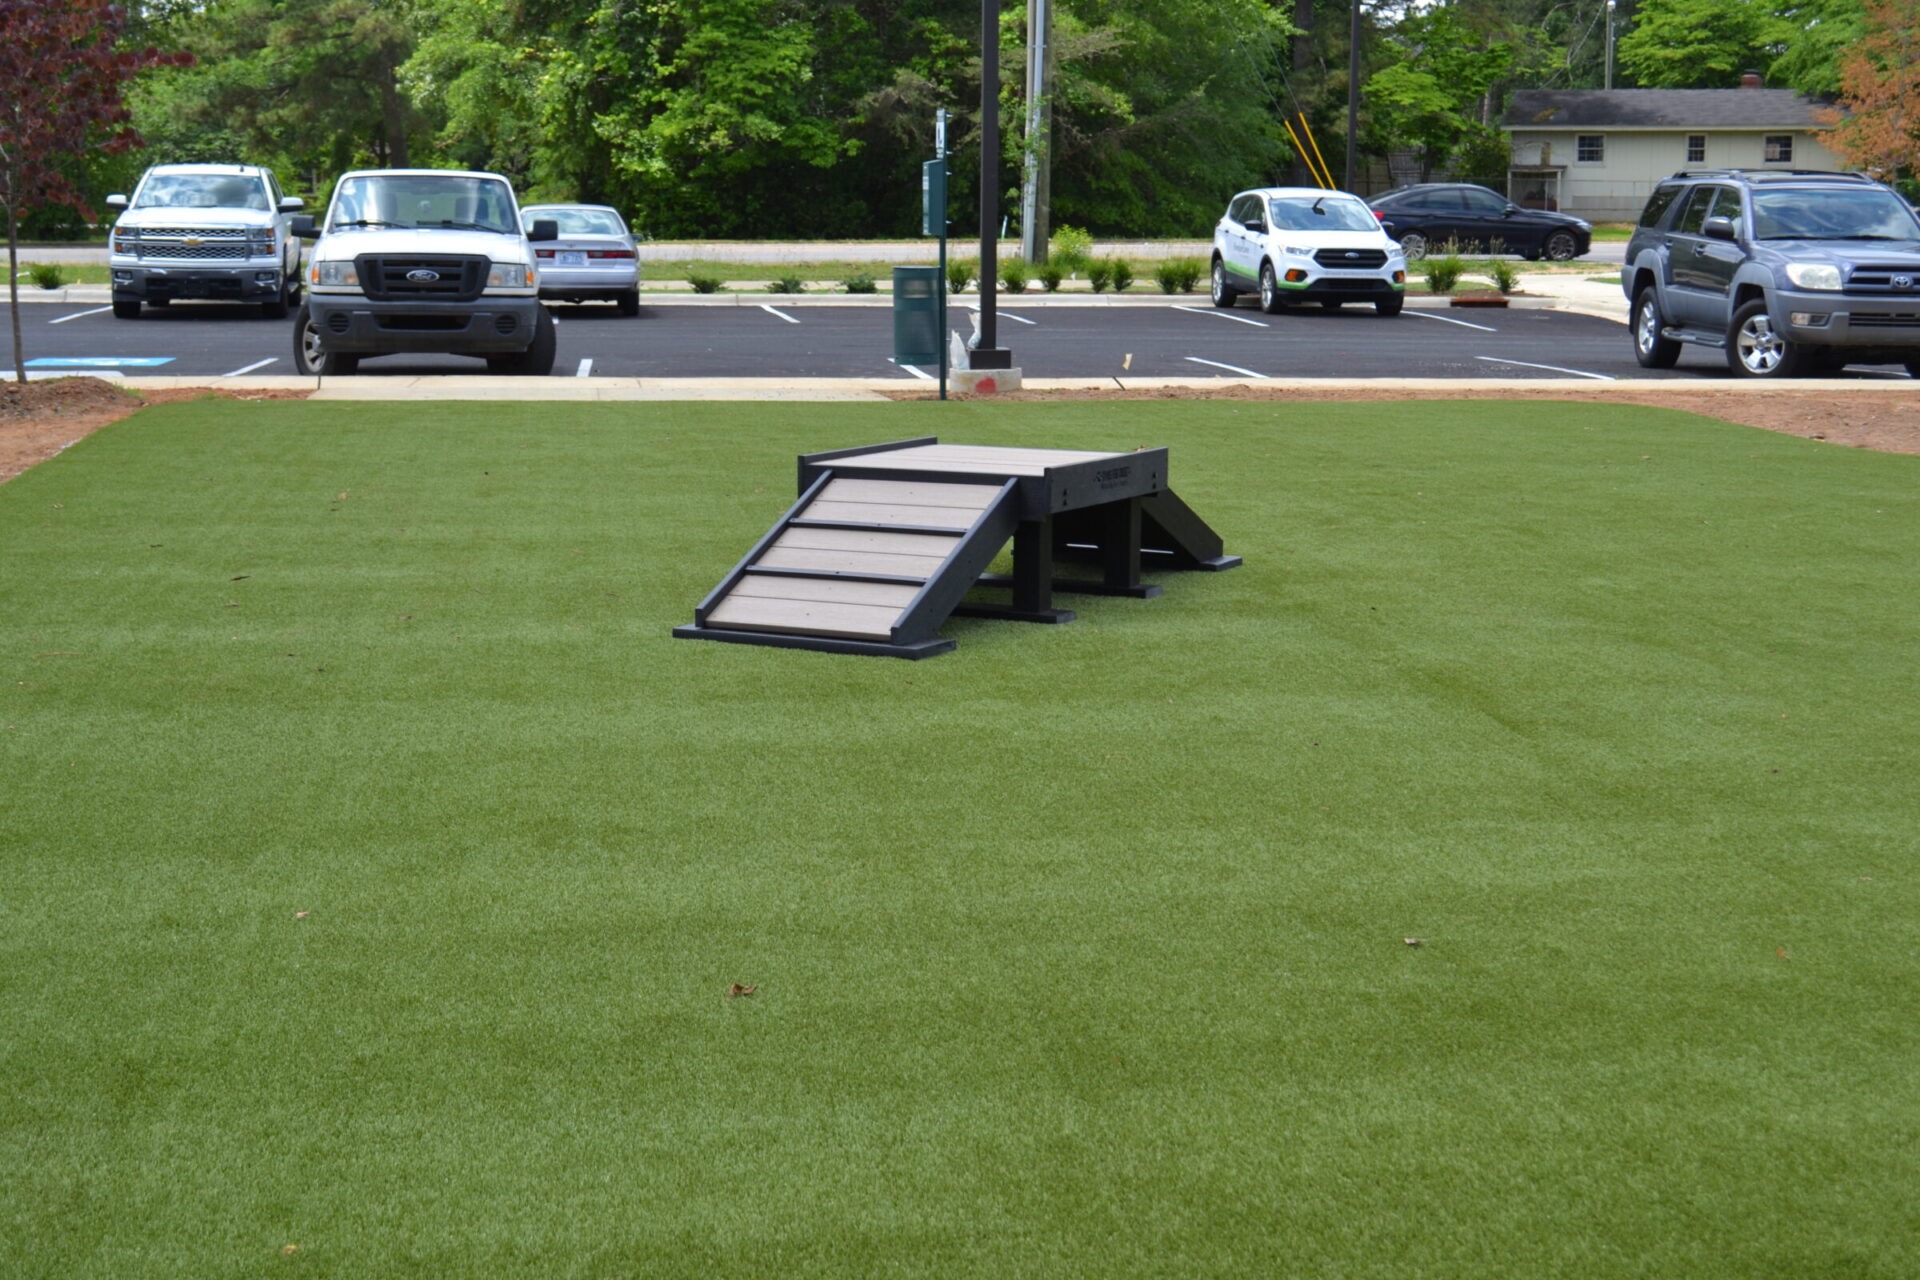 A black agility ramp for dogs stands on artificial grass with parking spaces and cars in the background surrounded by trees.